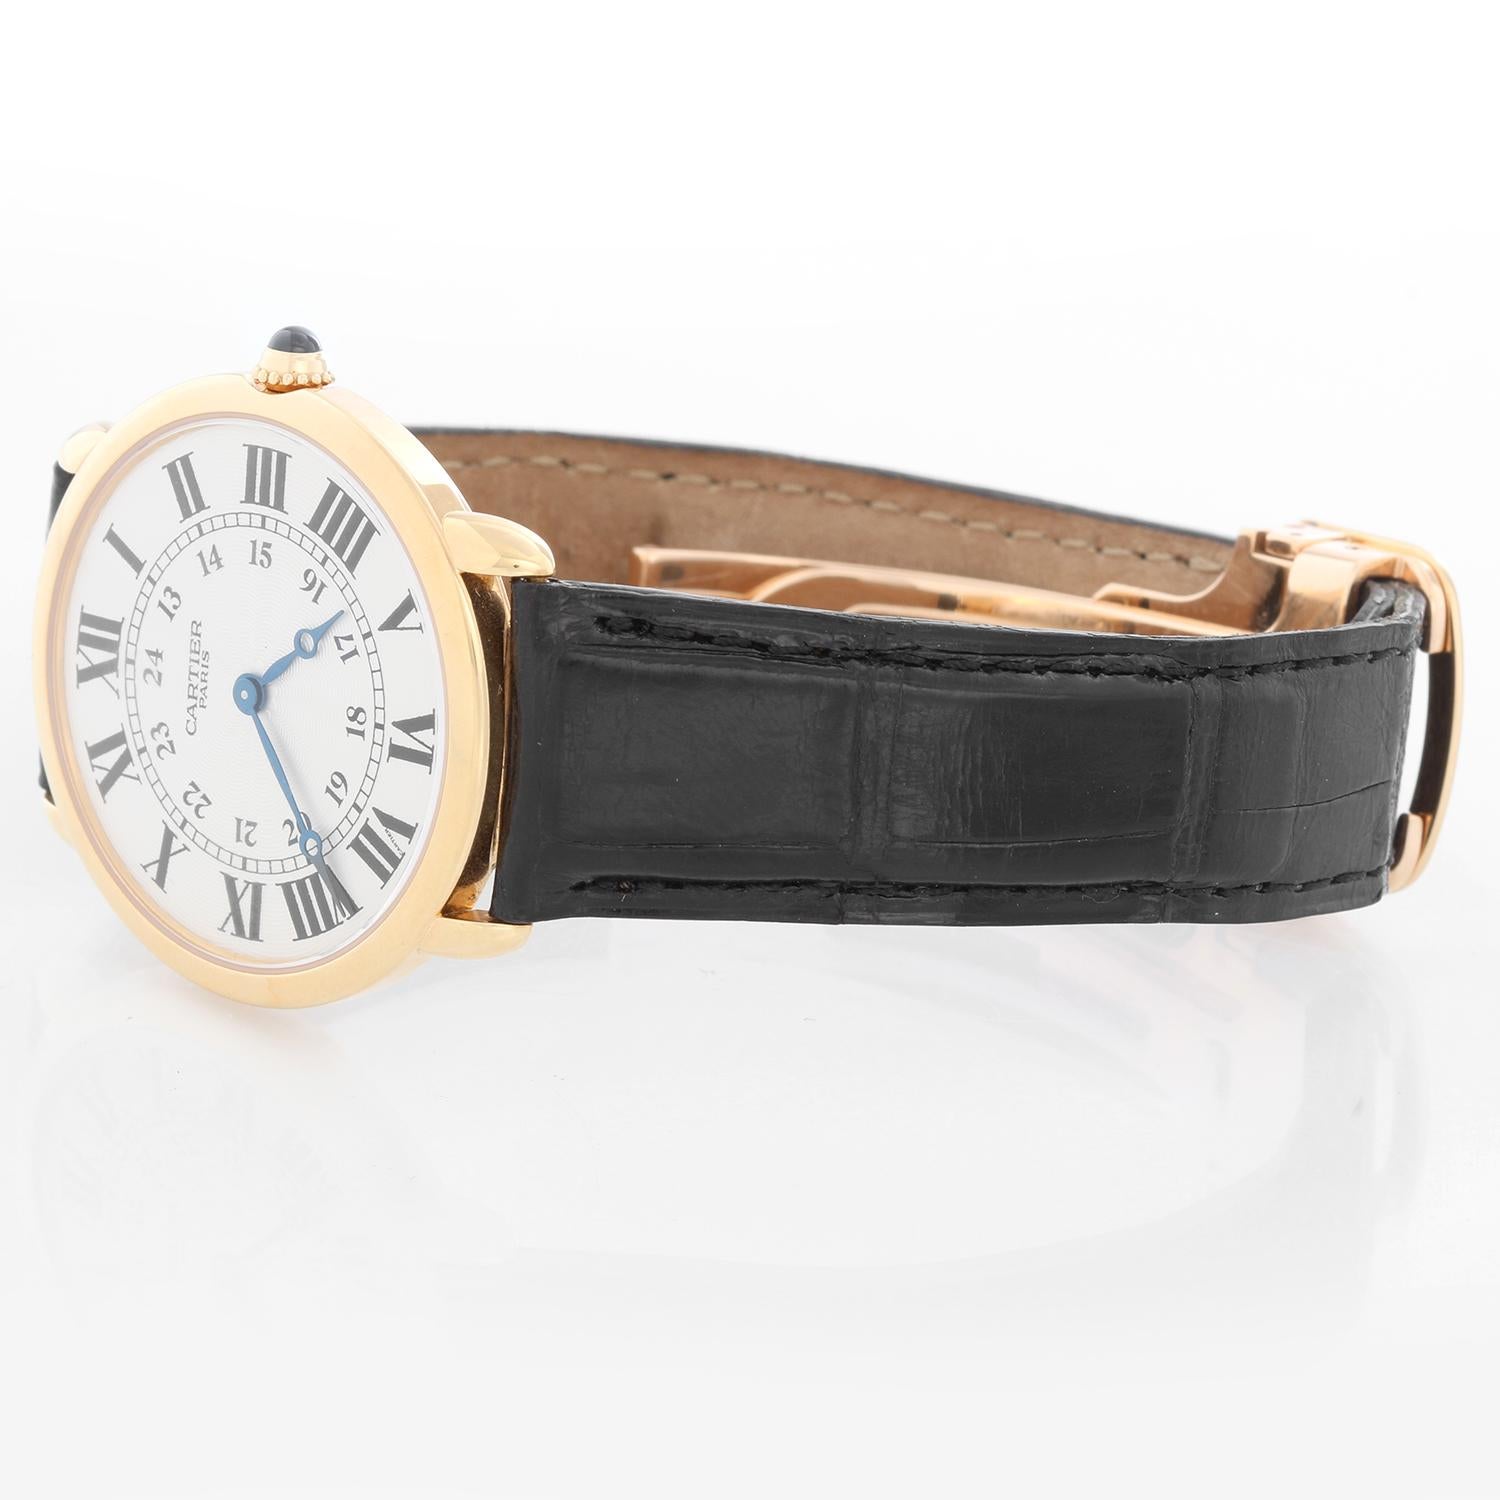 Cartier 18K Yellow Gold Ronde Louis Ladies Watch  - Manual winding. 18K Yellow Gold case ( 33 mm). Guilloche dial with Roman numerals and Arabic numerals. Black Cartier strap with Cartier yellow gold deployant clasp. Pre-owned with Cartier box.